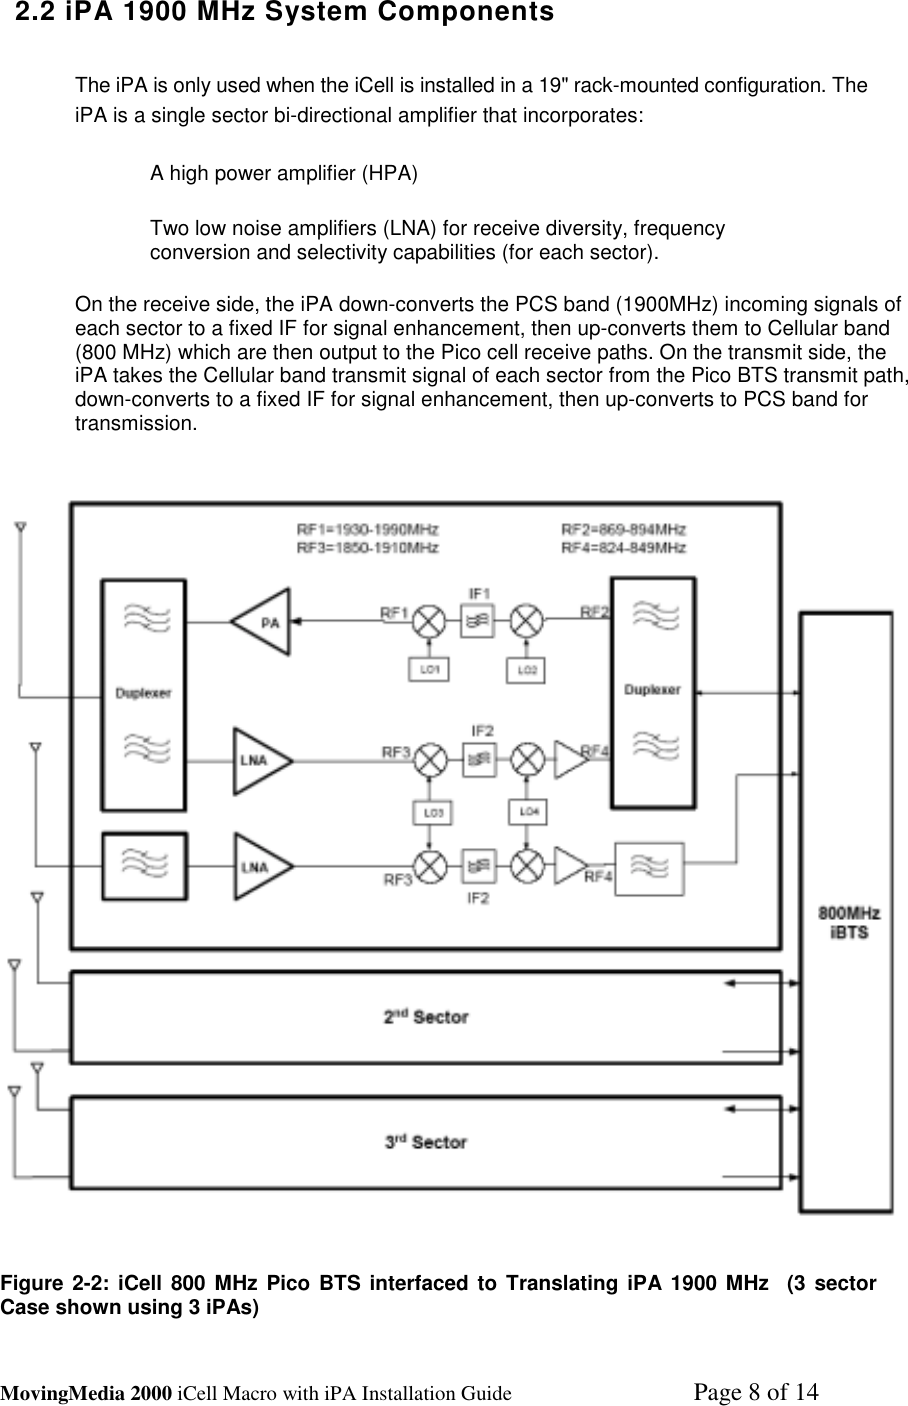 MovingMedia 2000 iCell Macro with iPA Installation Guide    Page 8 of 142.2 iPA 1900 MHz System ComponentsThe iPA is only used when the iCell is installed in a 19&quot; rack-mounted configuration. TheiPA is a single sector bi-directional amplifier that incorporates:A high power amplifier (HPA)Two low noise amplifiers (LNA) for receive diversity, frequencyconversion and selectivity capabilities (for each sector).On the receive side, the iPA down-converts the PCS band (1900MHz) incoming signals ofeach sector to a fixed IF for signal enhancement, then up-converts them to Cellular band(800 MHz) which are then output to the Pico cell receive paths. On the transmit side, theiPA takes the Cellular band transmit signal of each sector from the Pico BTS transmit path,down-converts to a fixed IF for signal enhancement, then up-converts to PCS band fortransmission.Figure 2-2: iCell 800 MHz Pico BTS interfaced to Translating iPA 1900 MHz  (3 sectorCase shown using 3 iPAs)